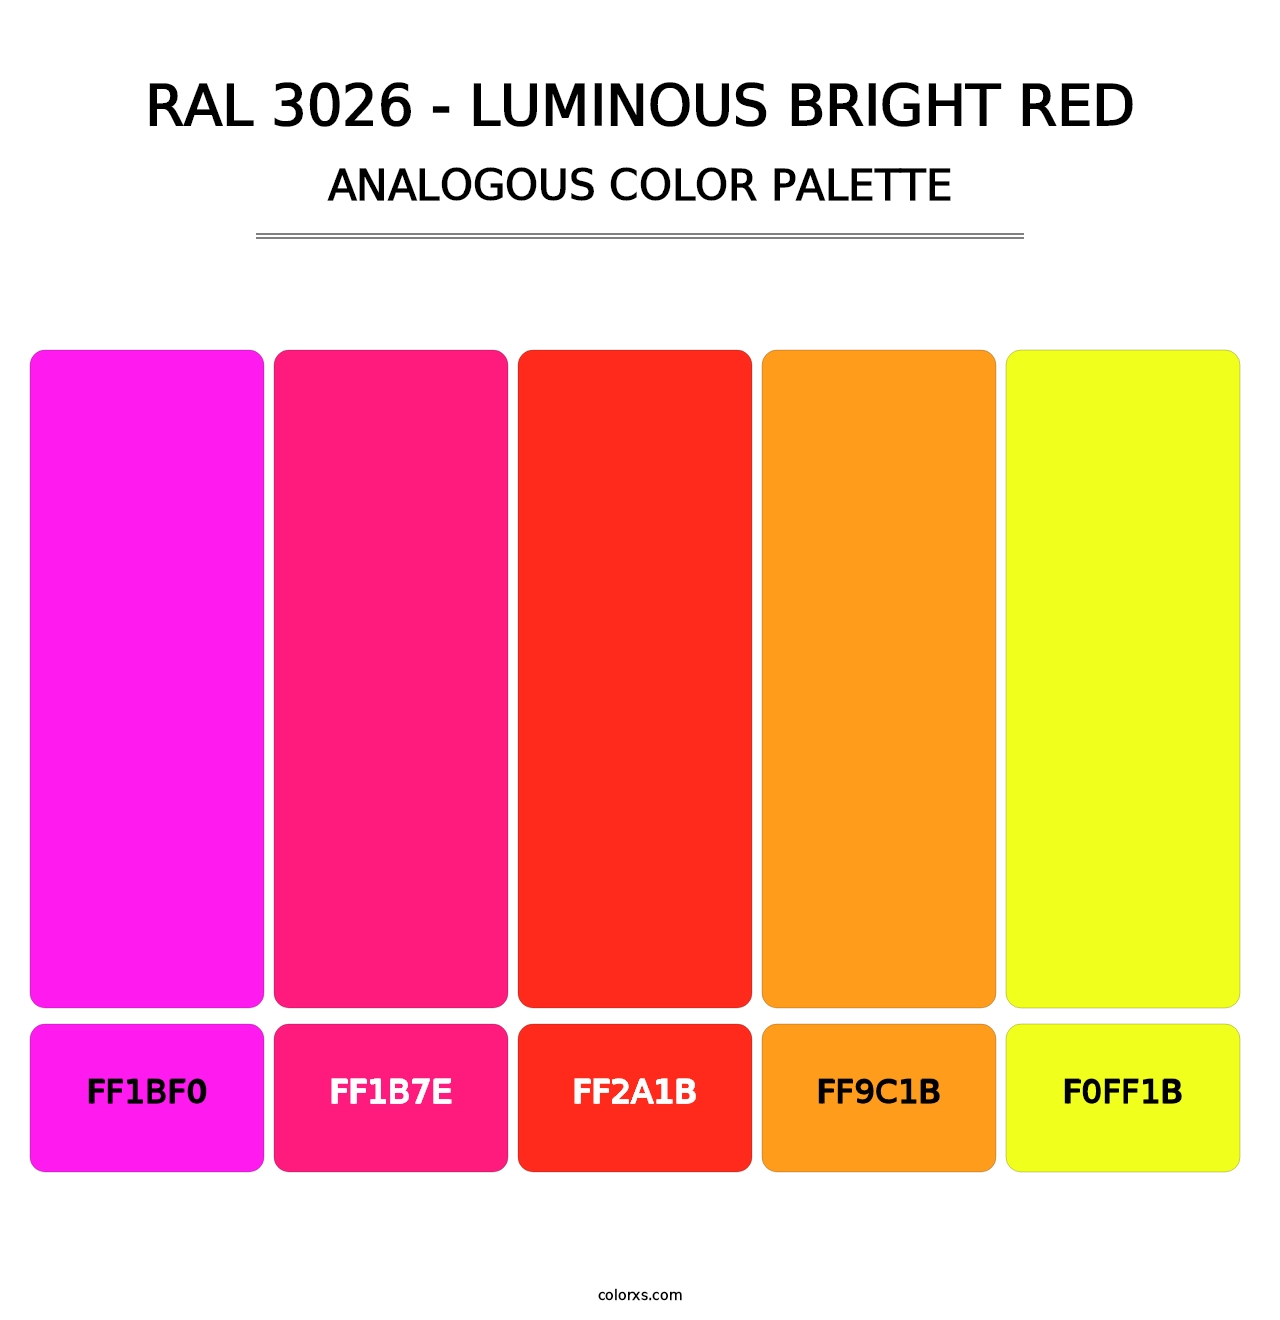 RAL 3026 - Luminous Bright Red - Analogous Color Palette